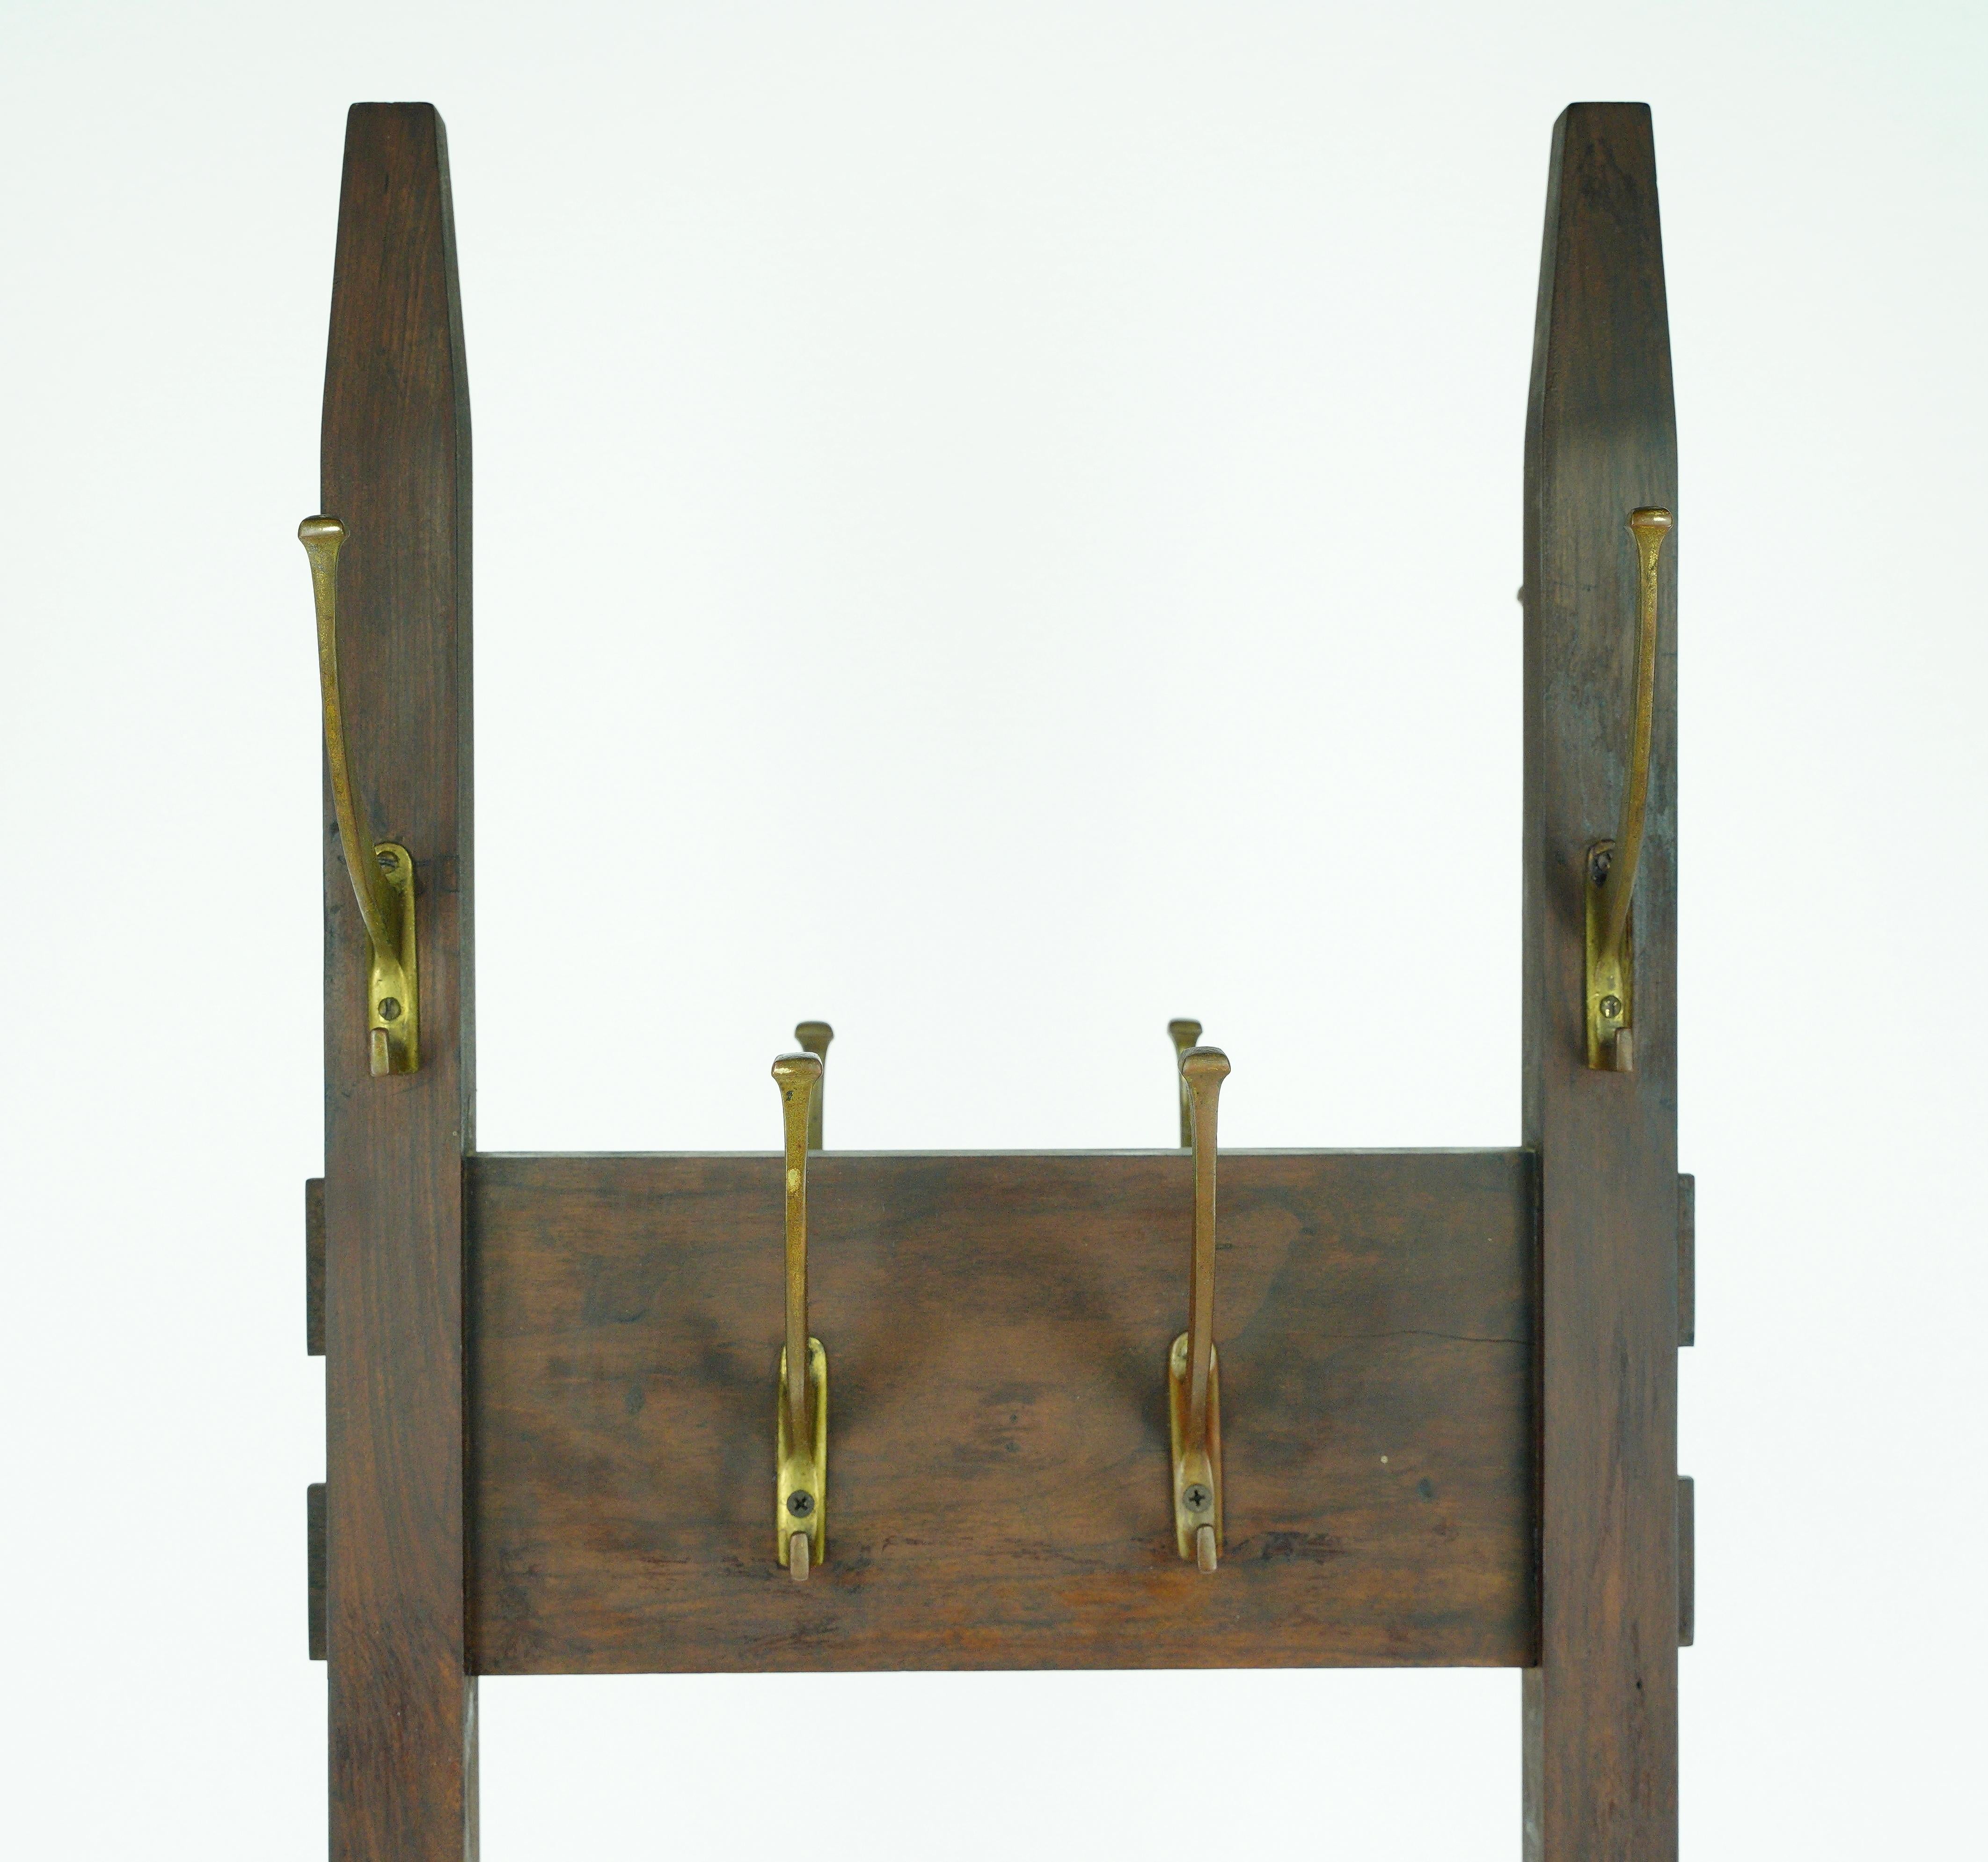 This free standing coat rack echoes timeless design. With an Arts & Crafts style and brass finished steel hooks, it embodies both form and function. This coat rack adds a touch of vintage charm to spaces, providing a convenient storage solution for